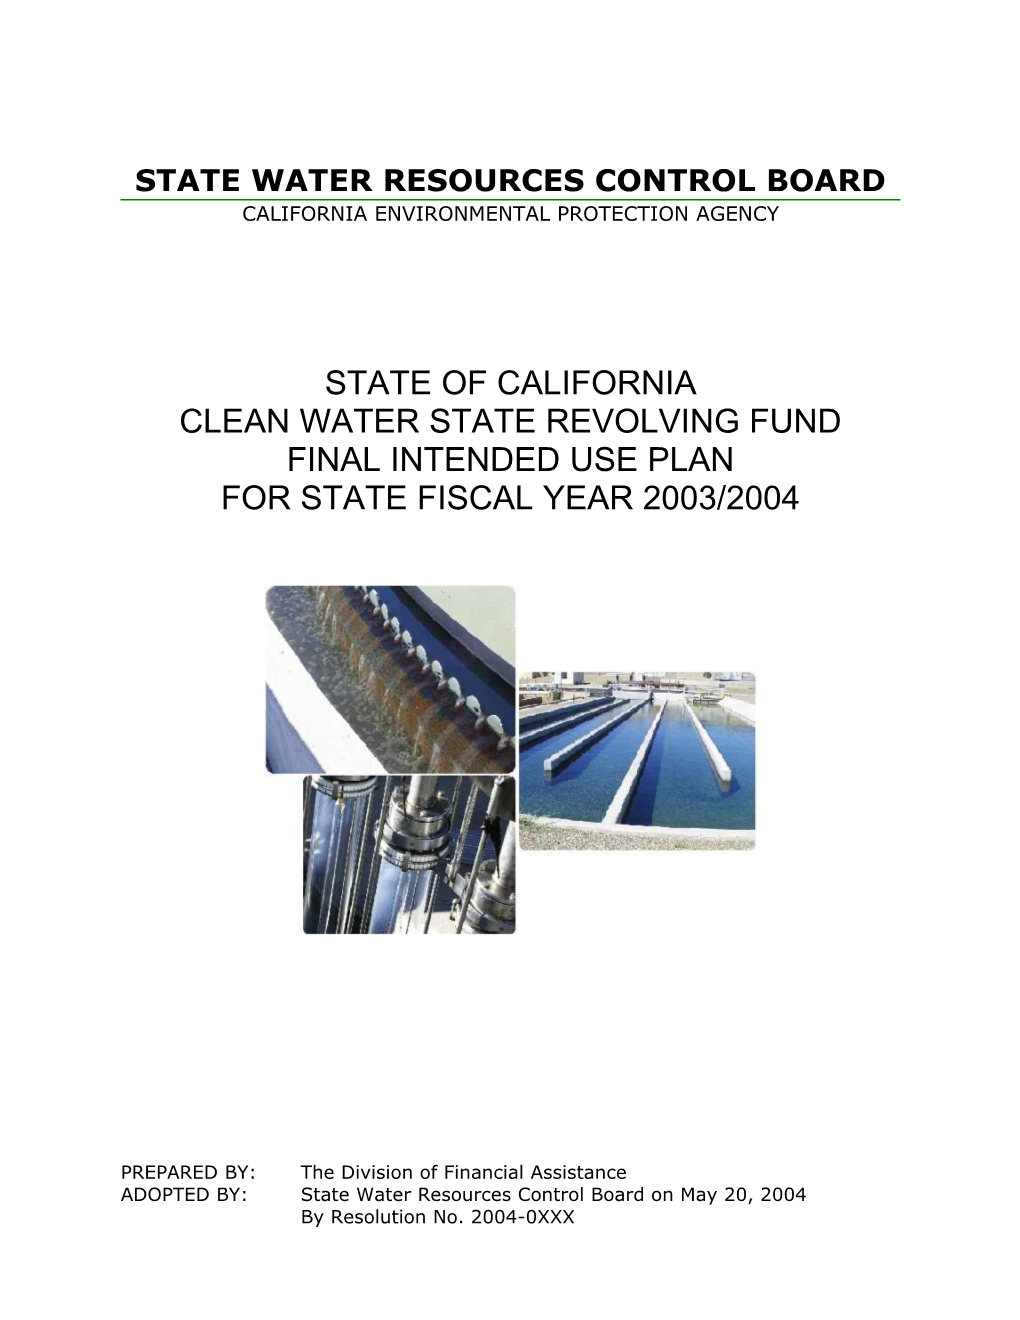 State of California s83